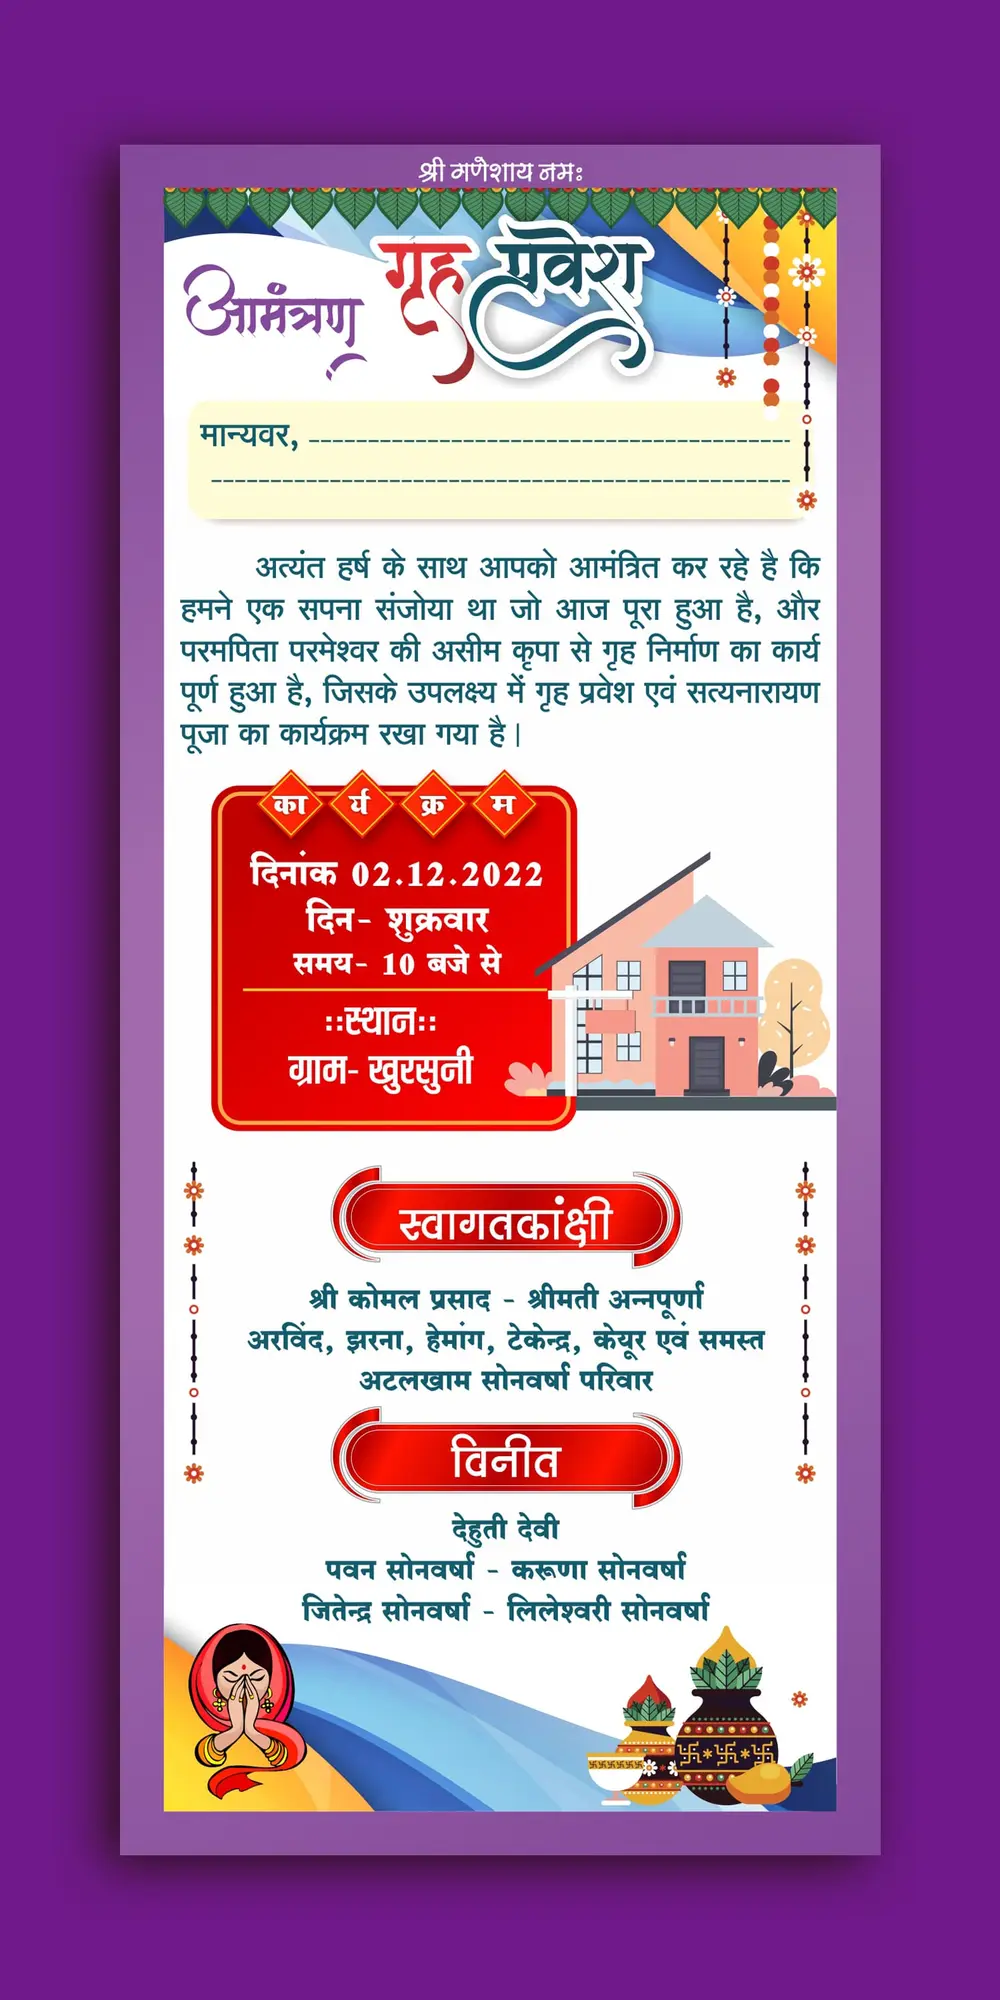 FHD_Griha pravesh invitation card template in hindi cdr and psd file download_091122-min